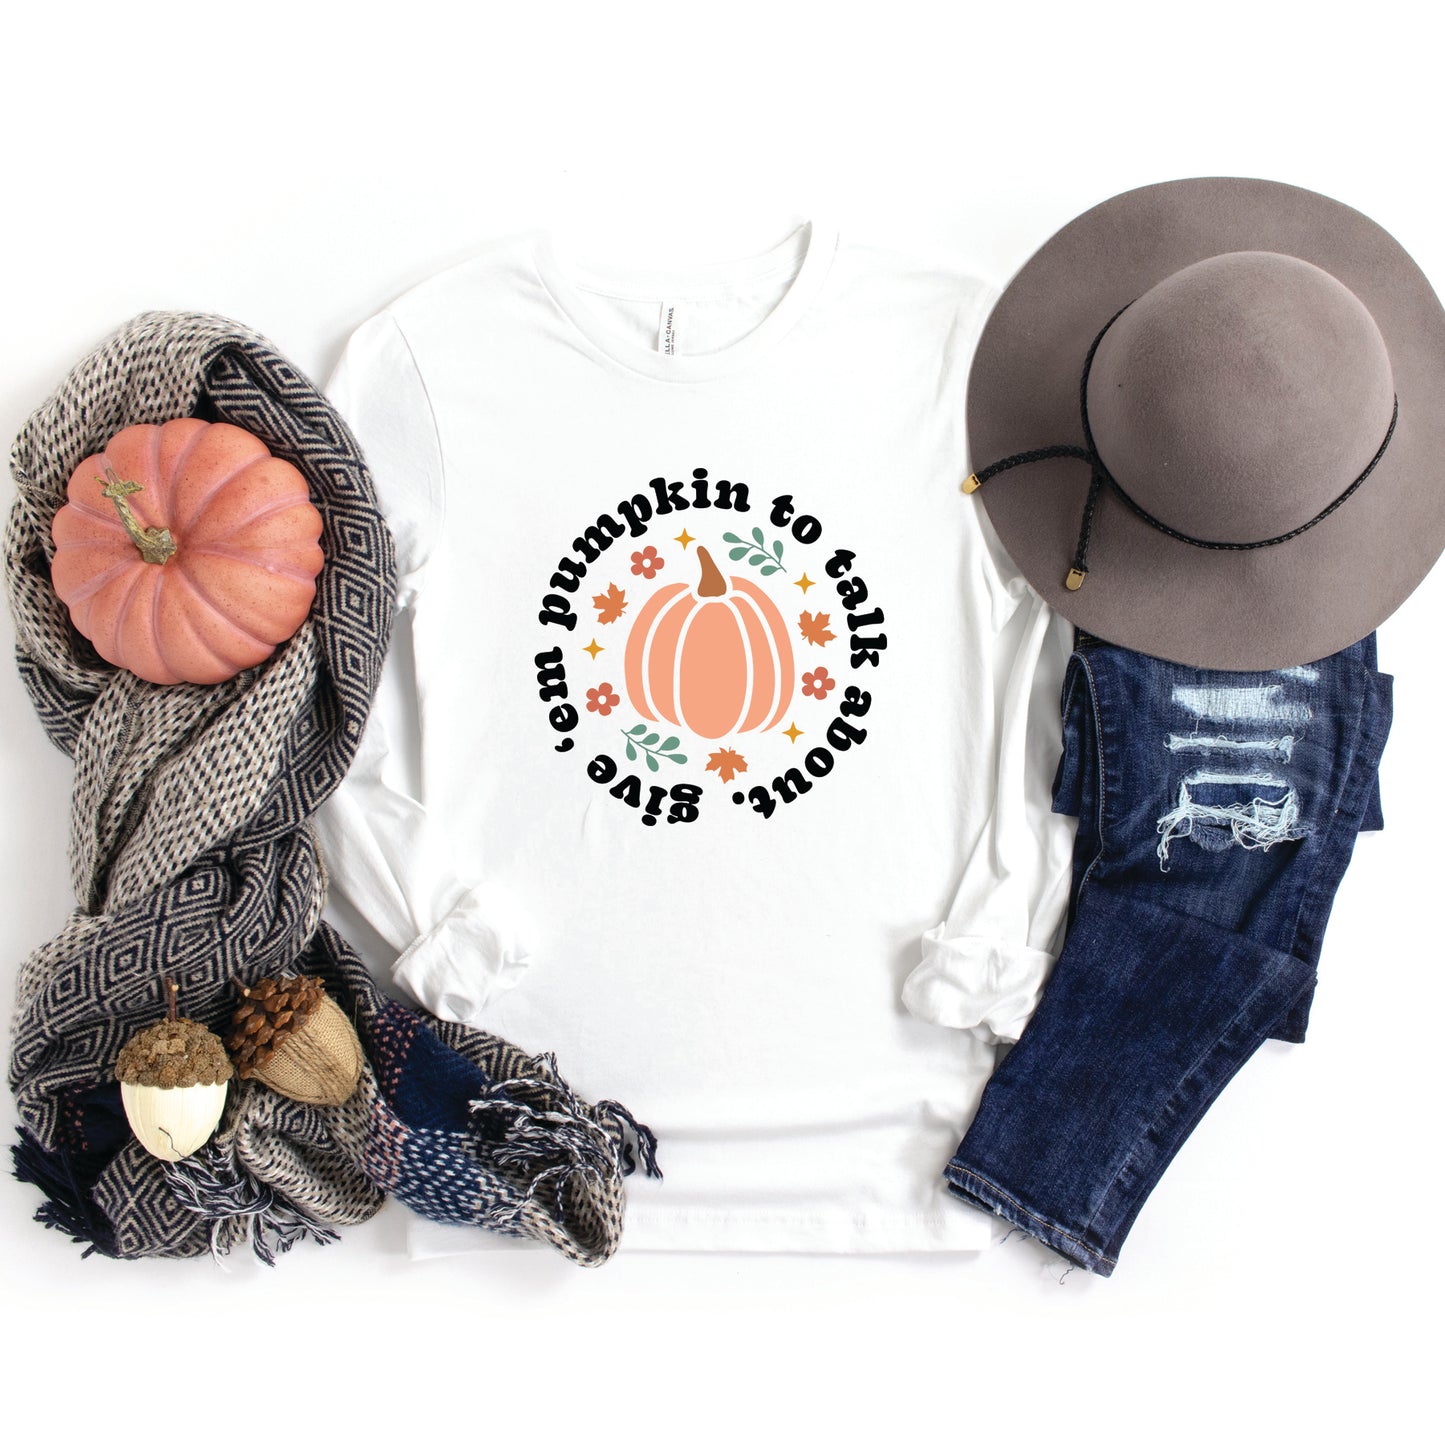 Give Em Pumpkin To Talk About Circle | Long Sleeve Crew Neck